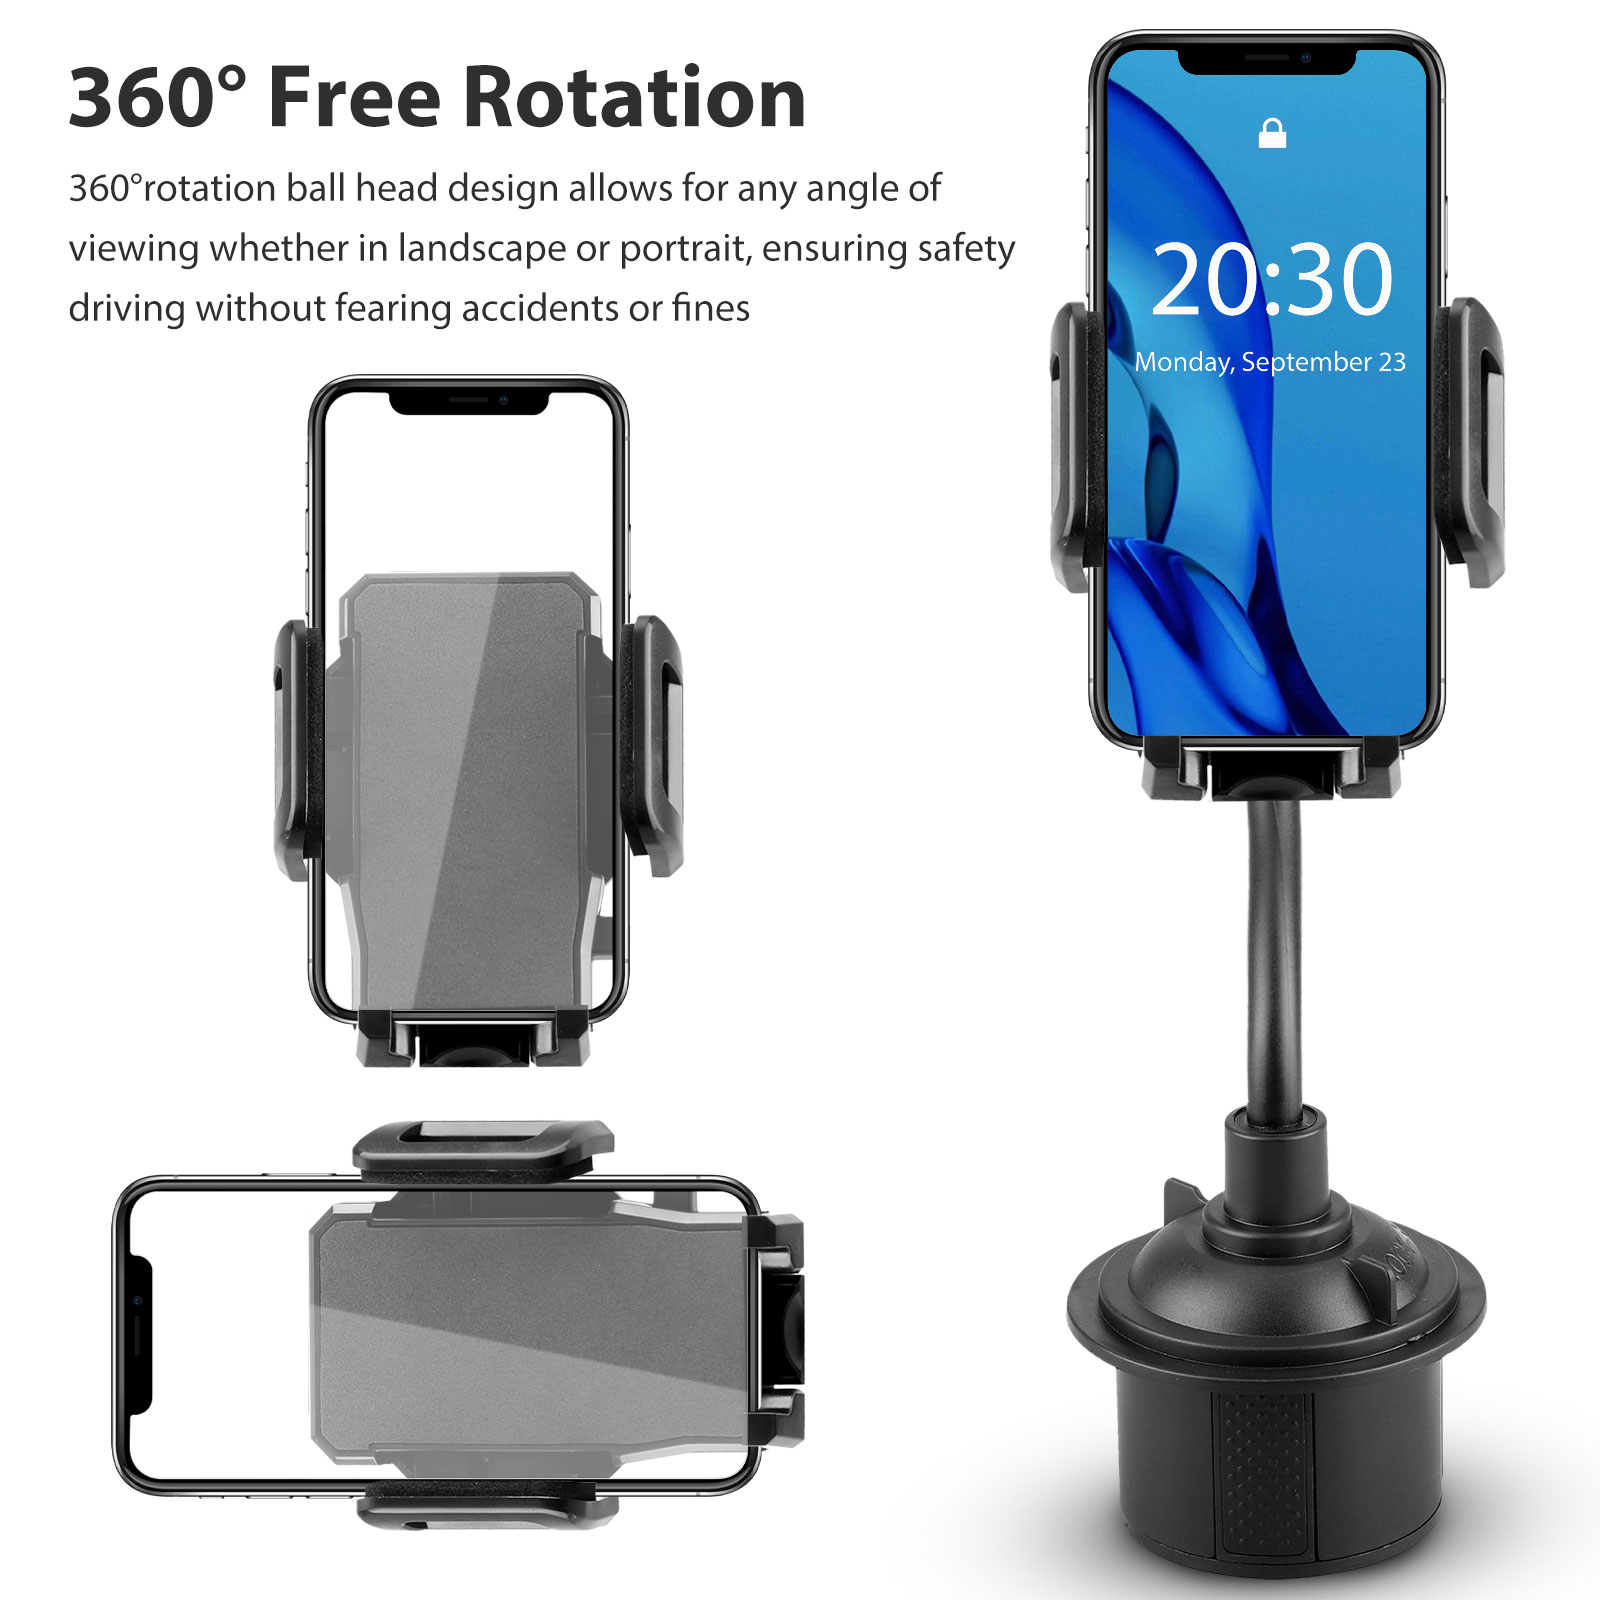 Car Phone Mount, EEEkit Universal Cell Phone Holder, Car Cup Holder Mount Fit for iPhone 13 12 Pro Max 11 Xs Max R X 8 Plus, Samsung Galaxy S21 S20 S10 and More - image 3 of 11